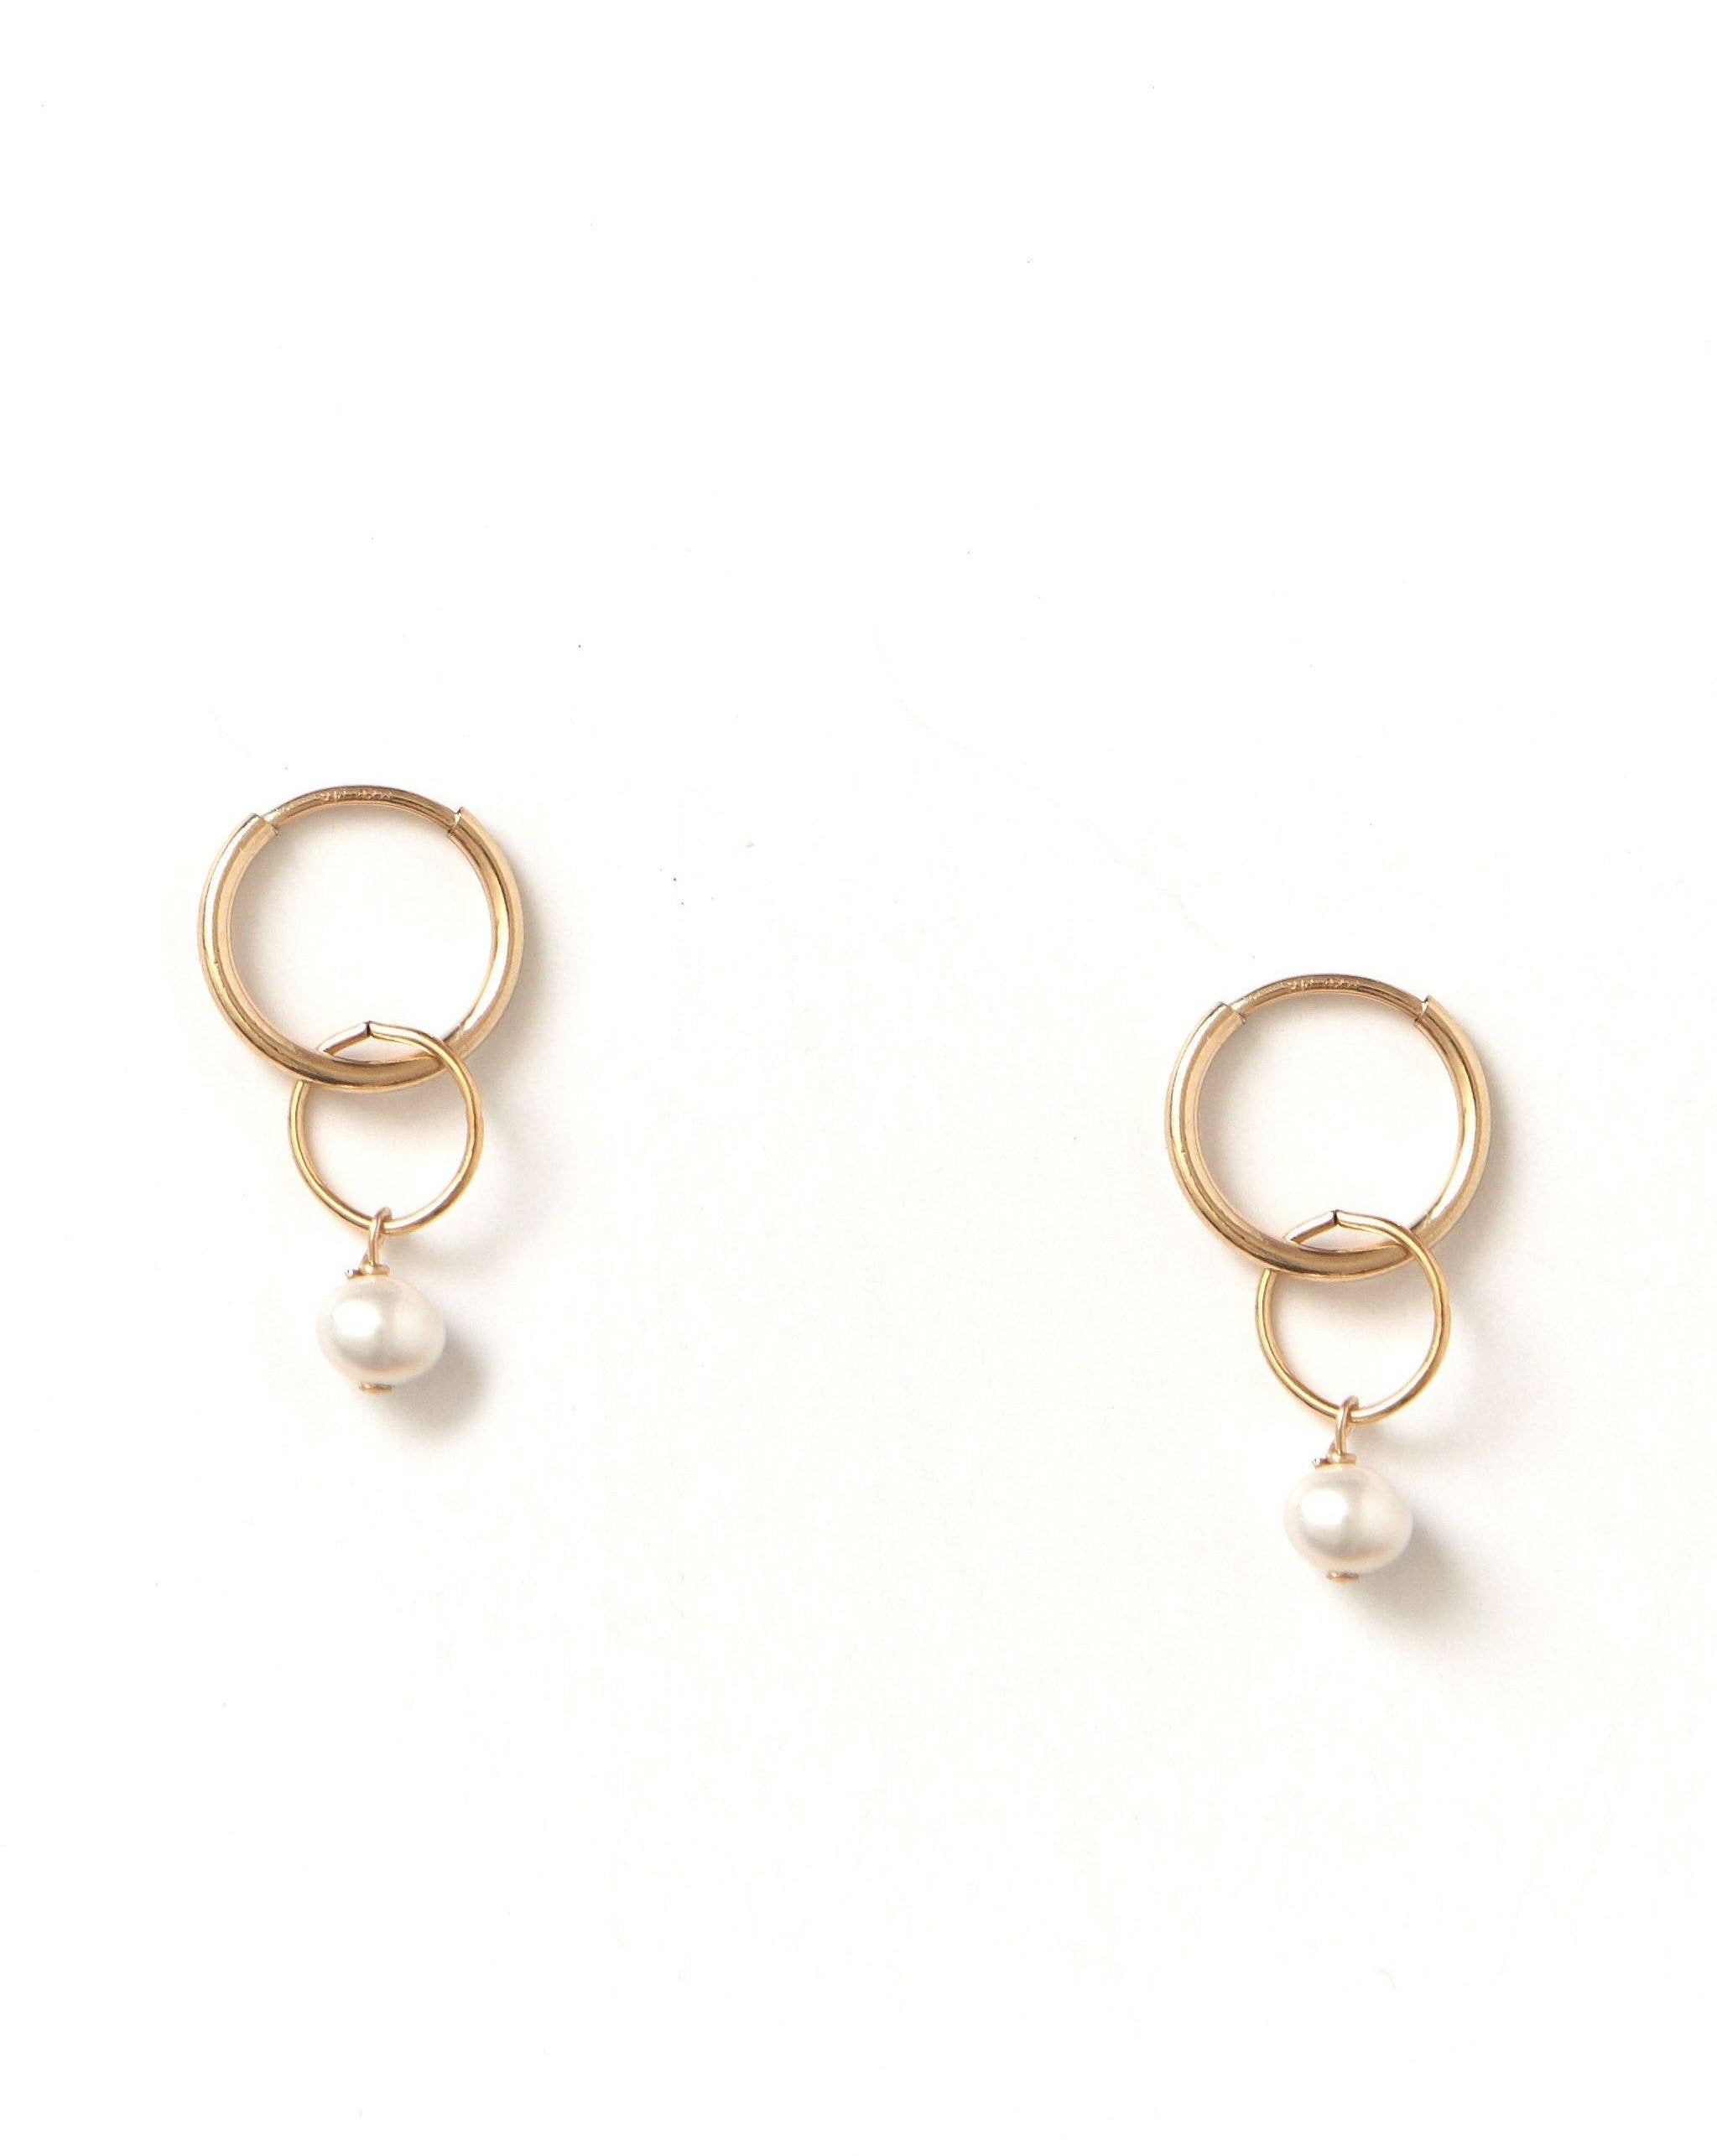 Caen Pearl Hoops by KOZAKH. 12mm hoop earrings, crafted in 14K Gold Filled, featuring 6mm to 7mm Pearls.